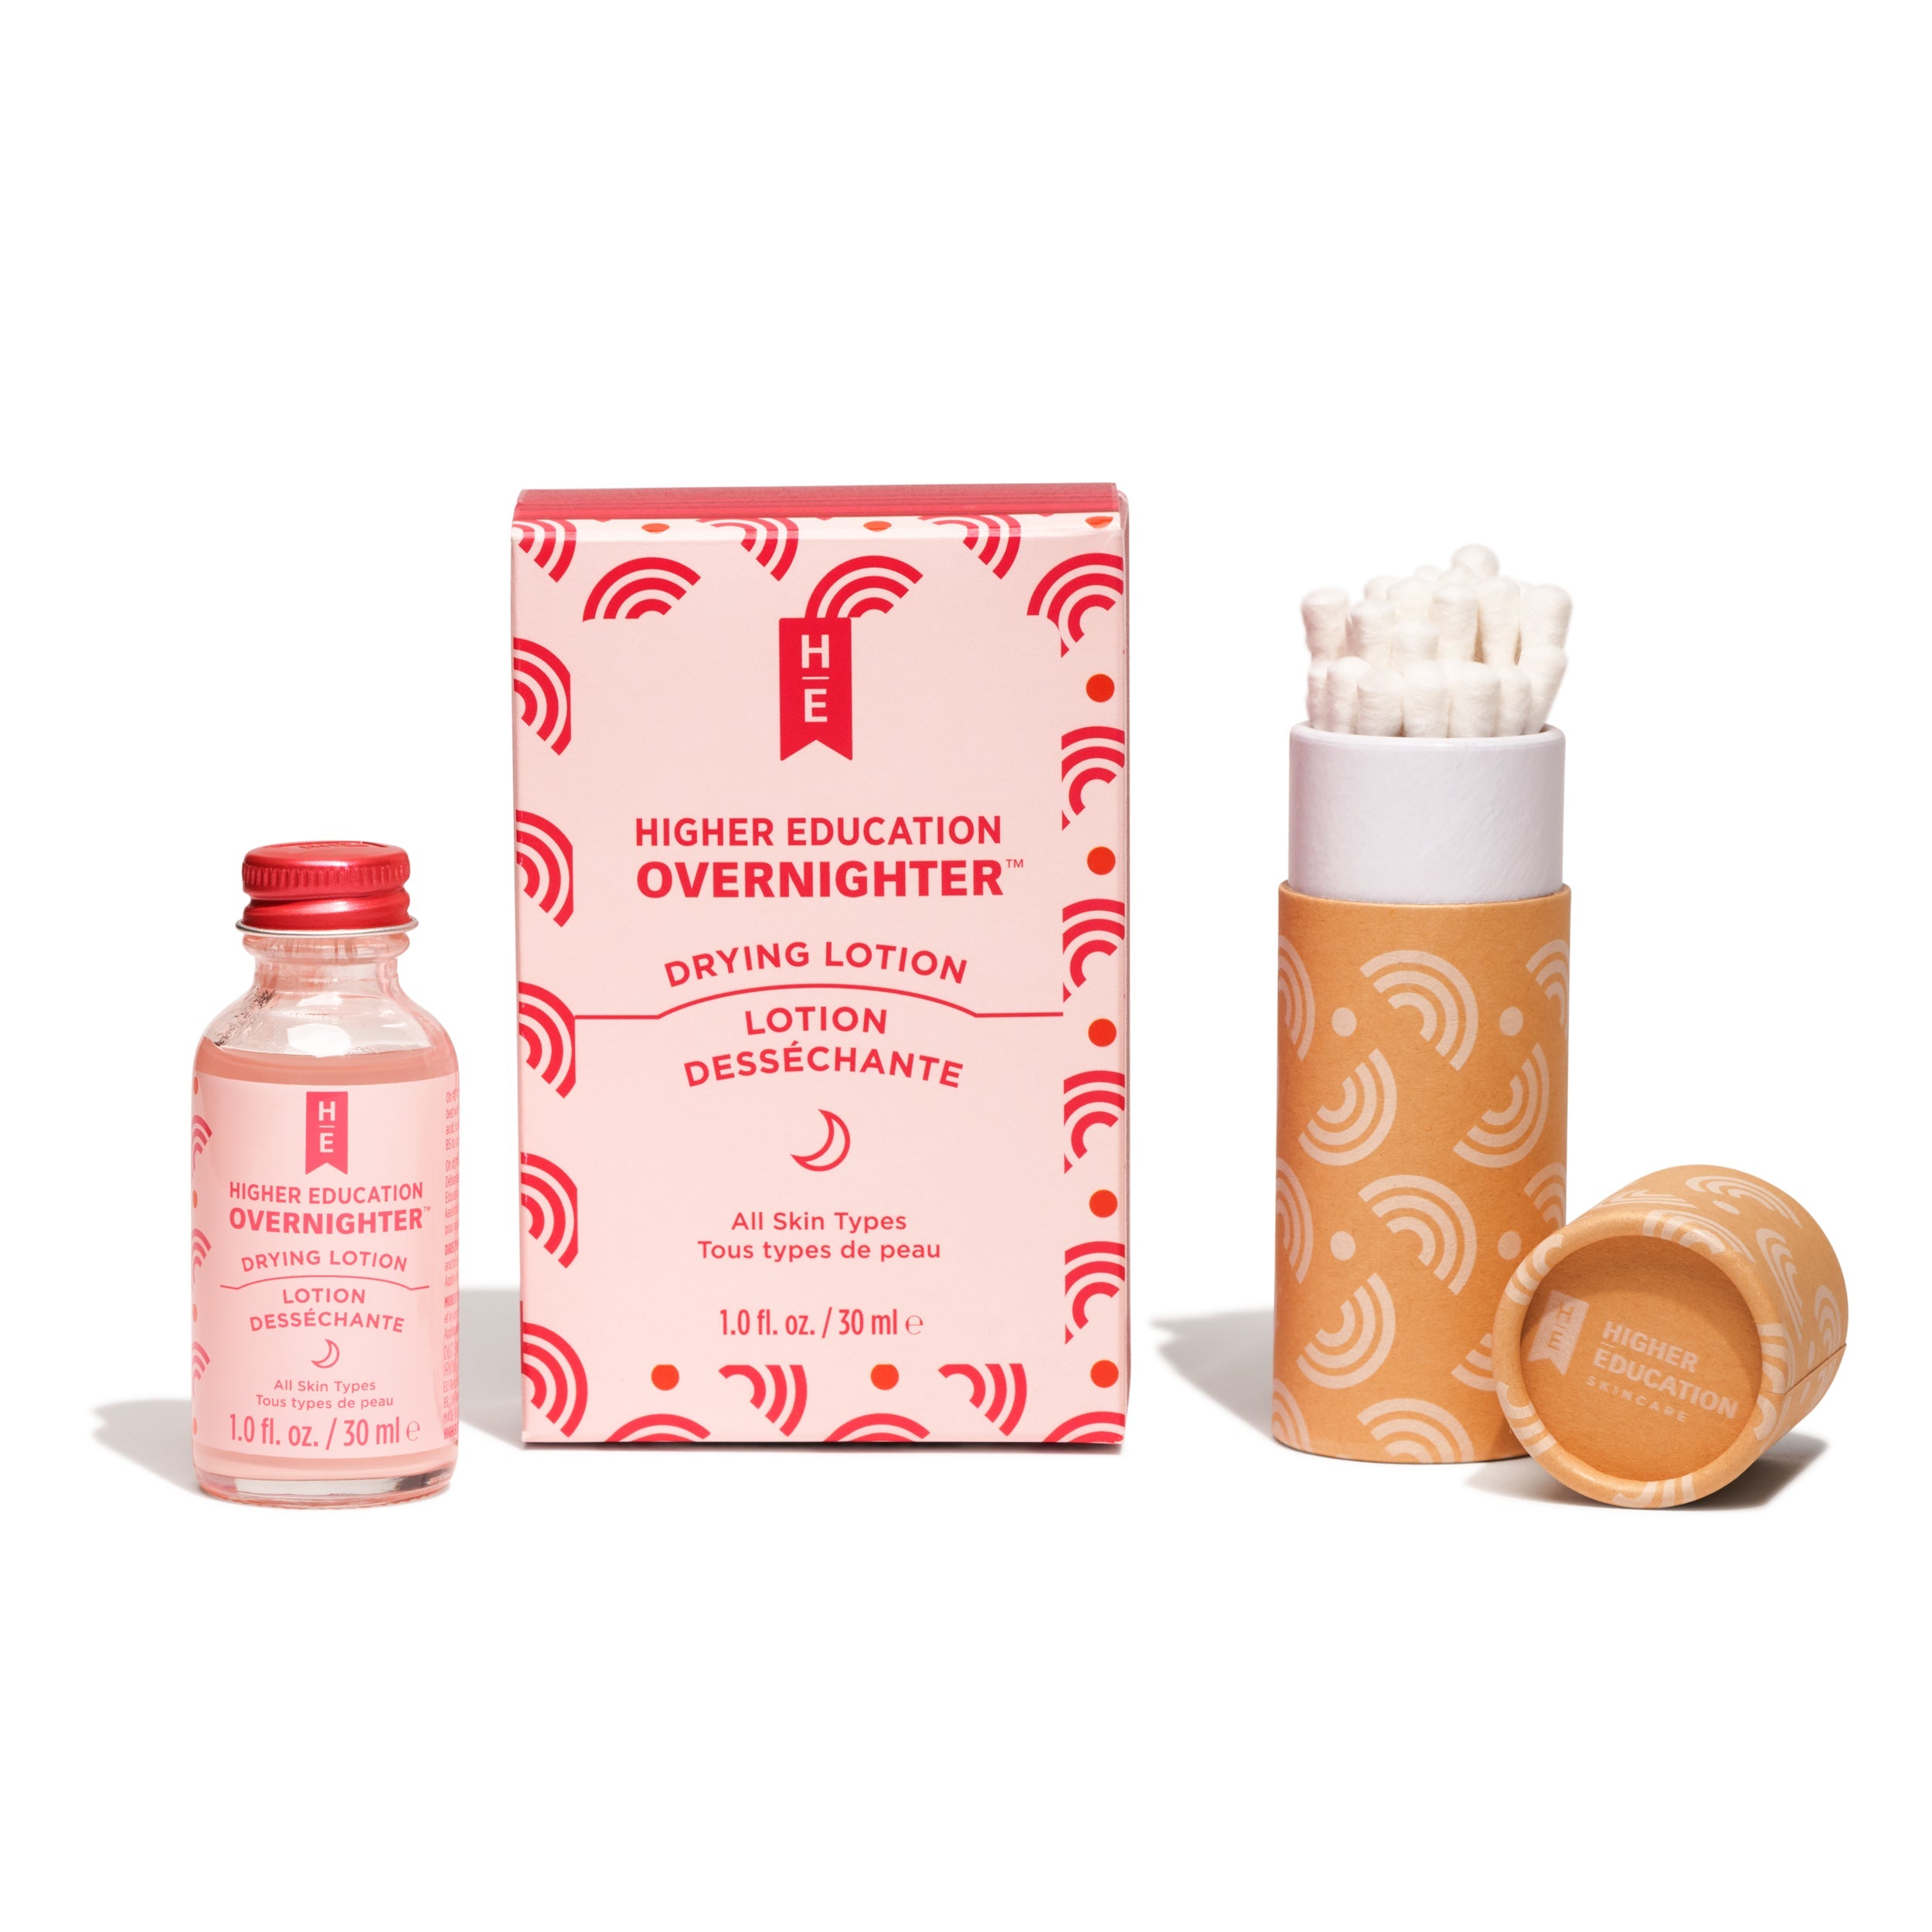 OVERNIGHTER™ Drying Lotion – Higher Skincare